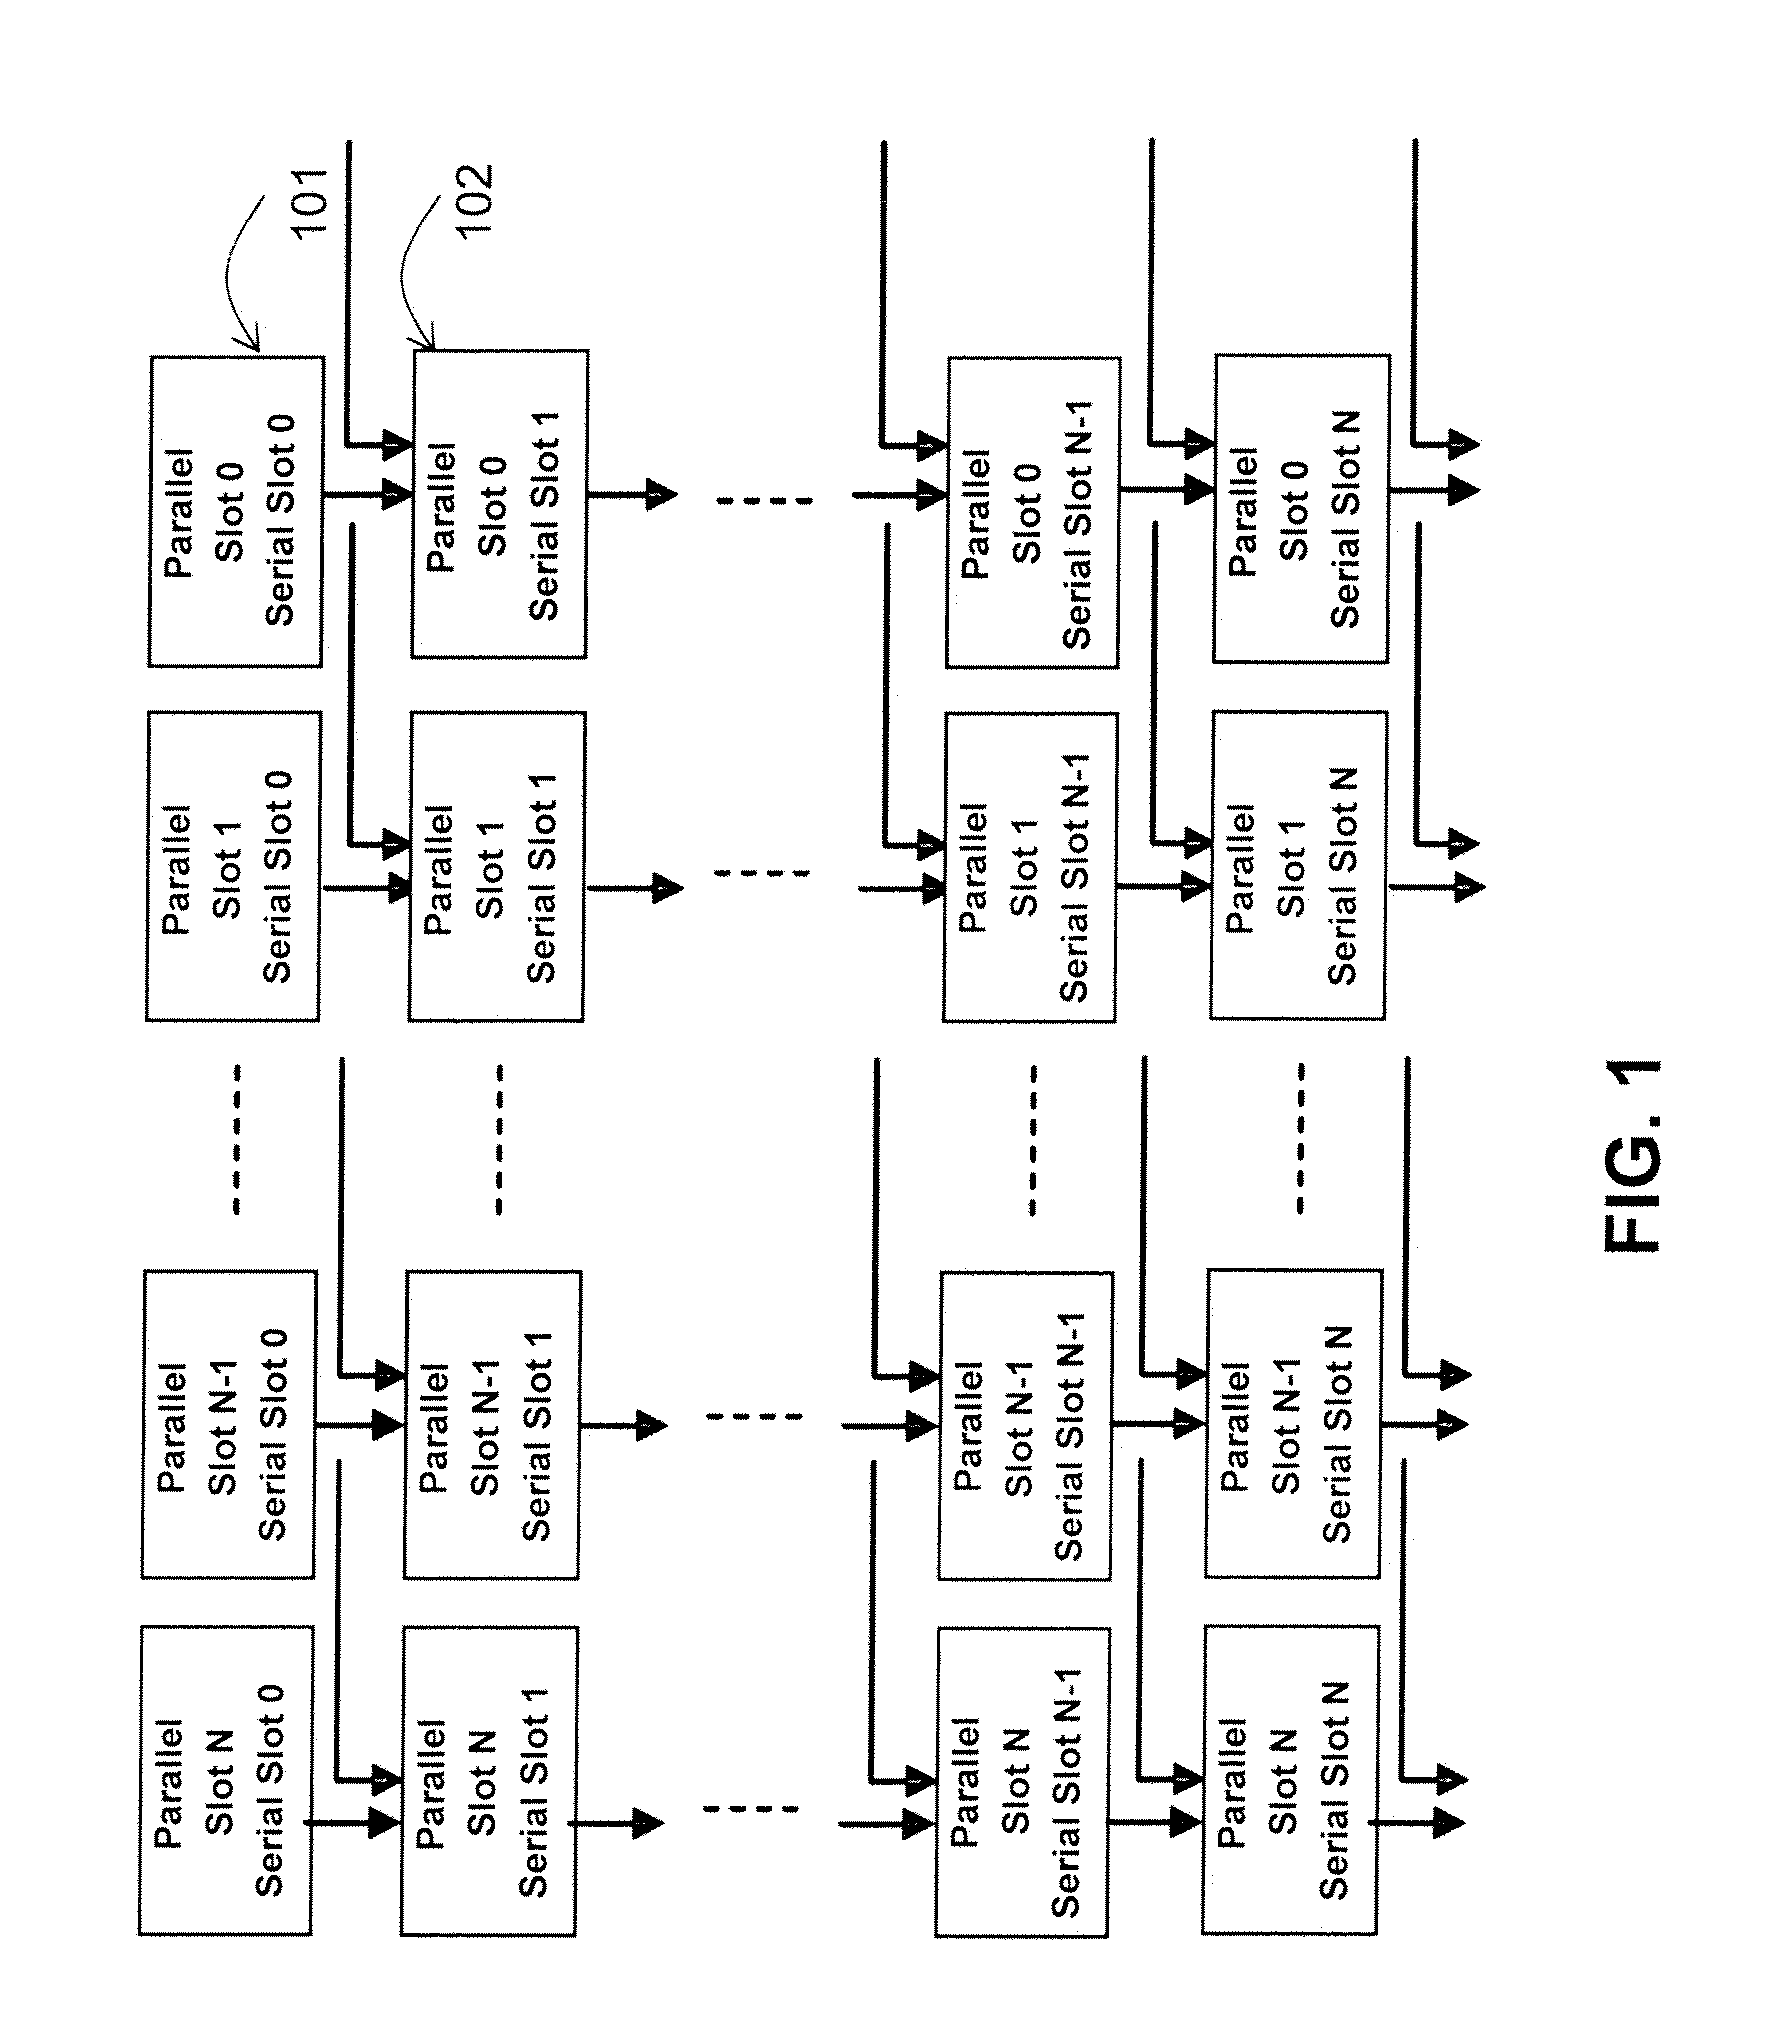 Apparatus and Method for Processing an Instruction Matrix Specifying Parallel and Dependent Operations